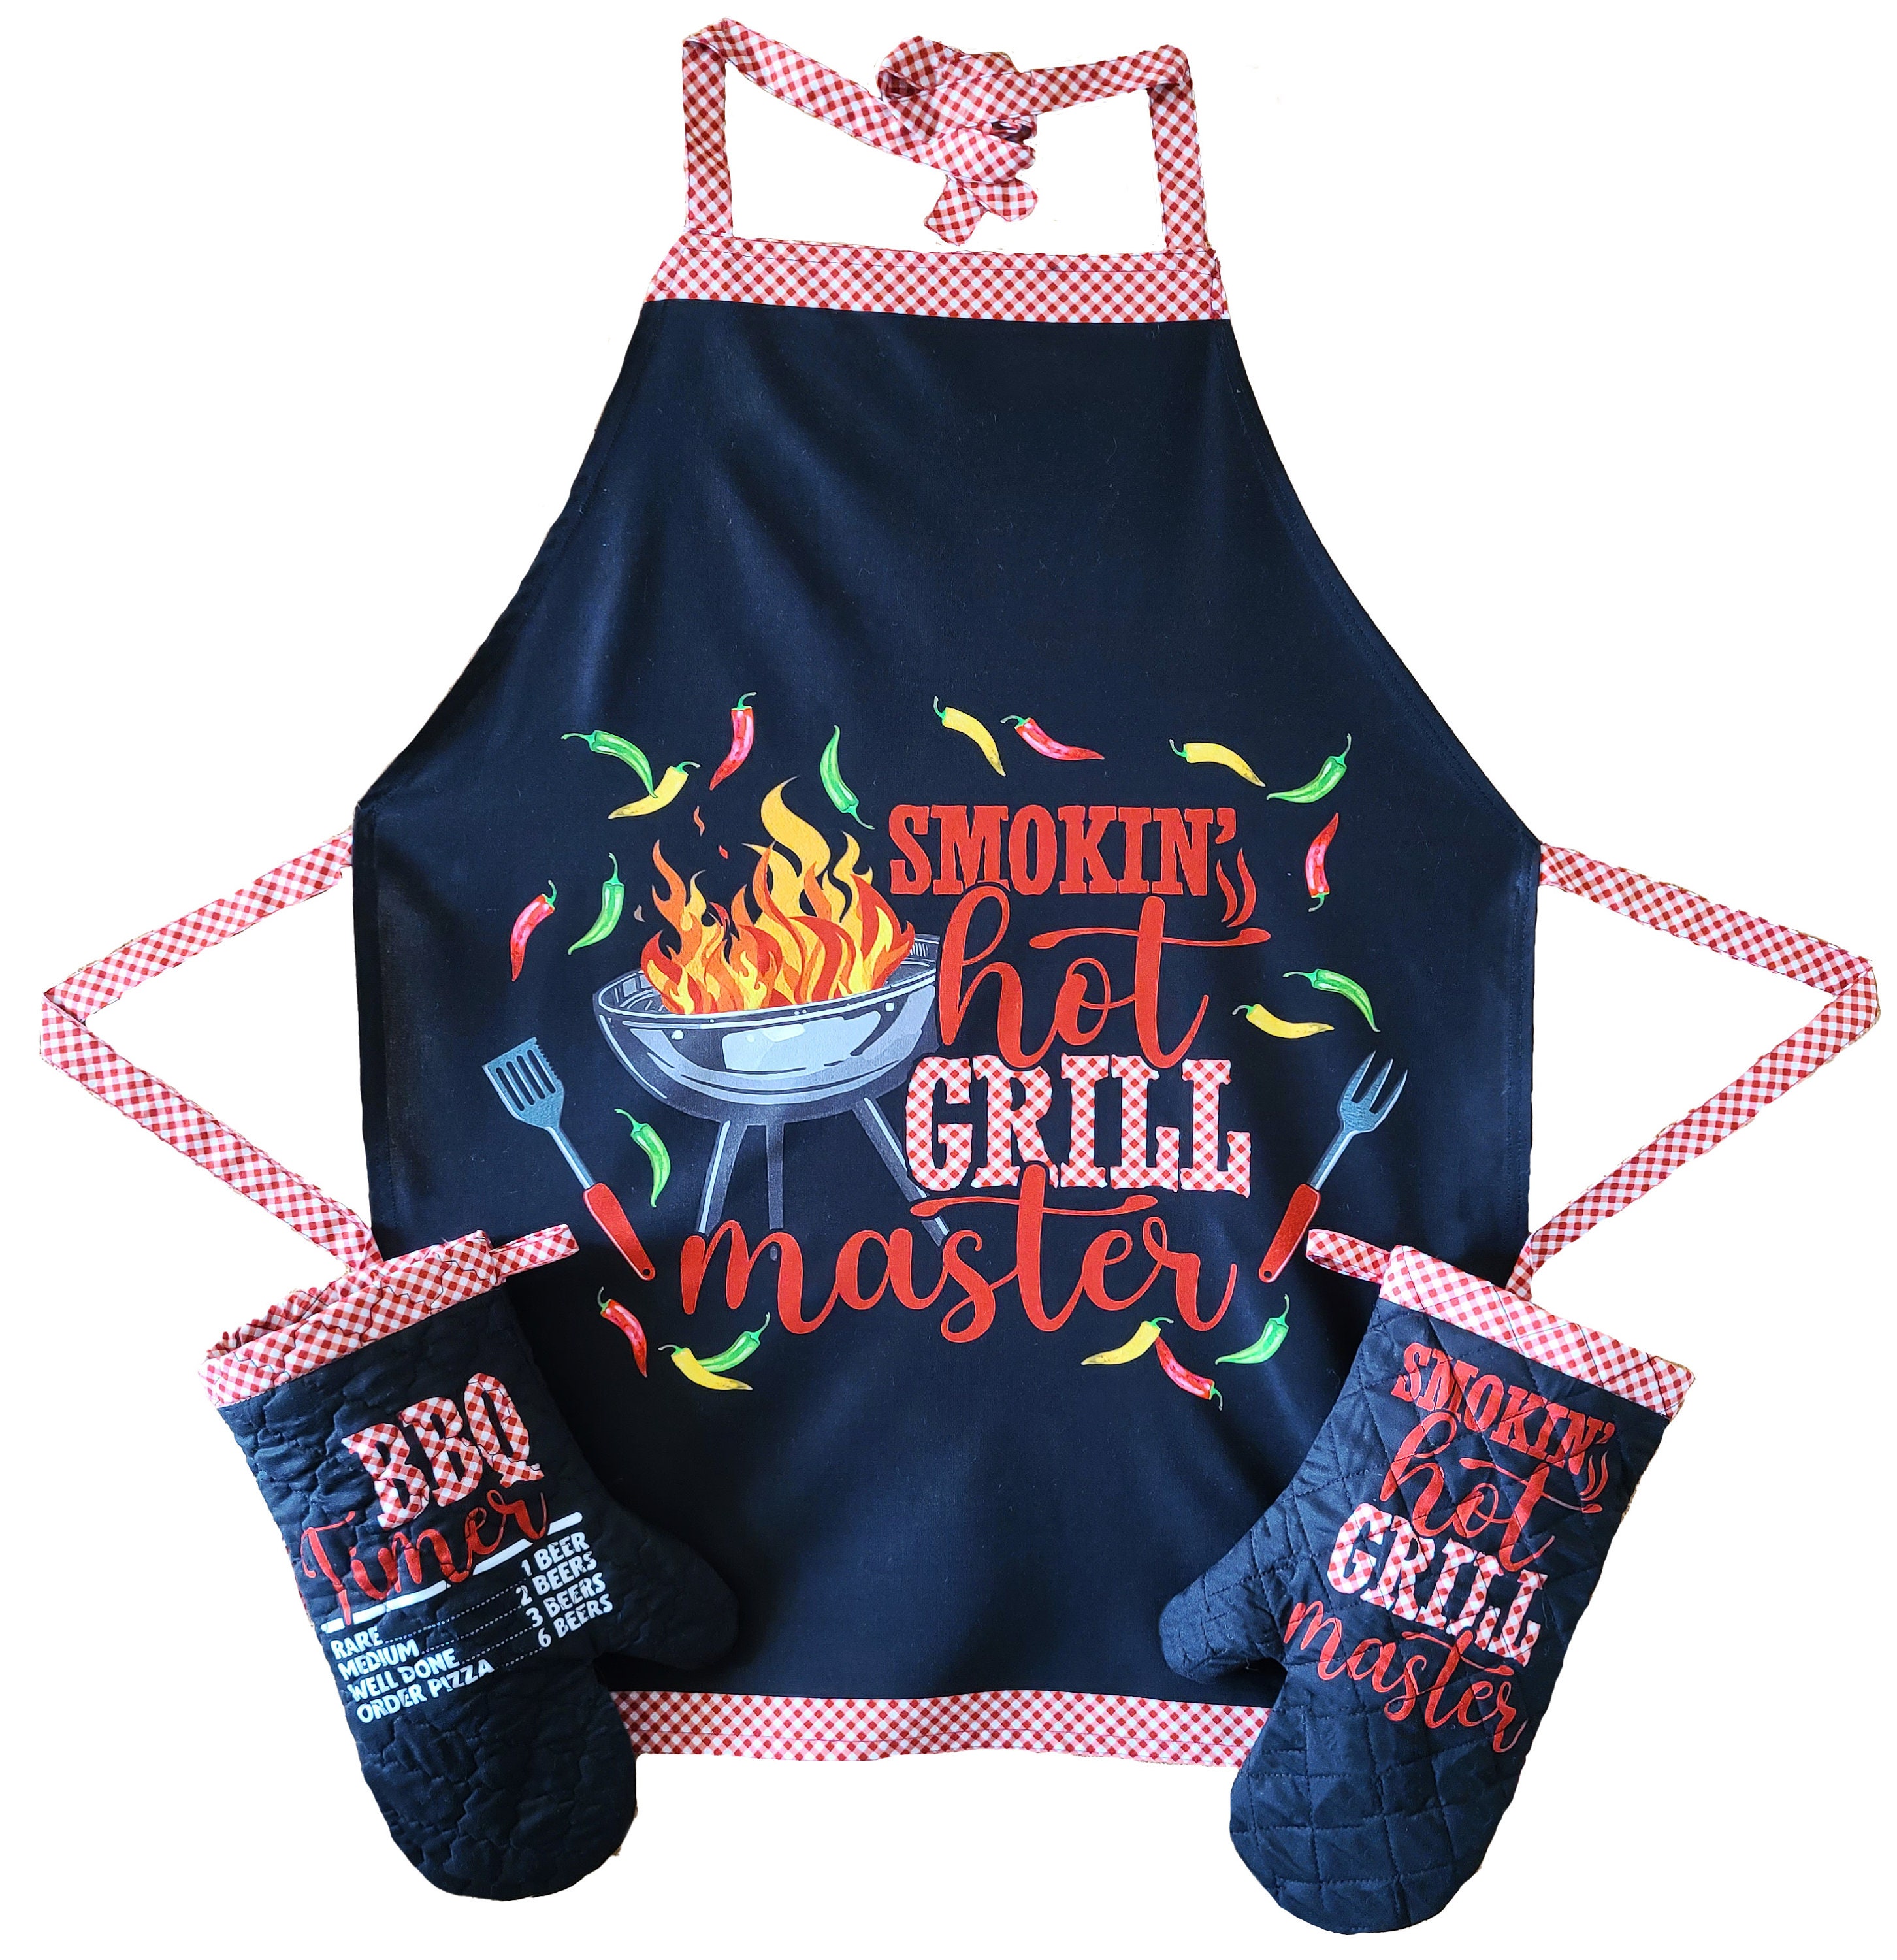 17 Smokin' Hot Personalized Grill Gifts